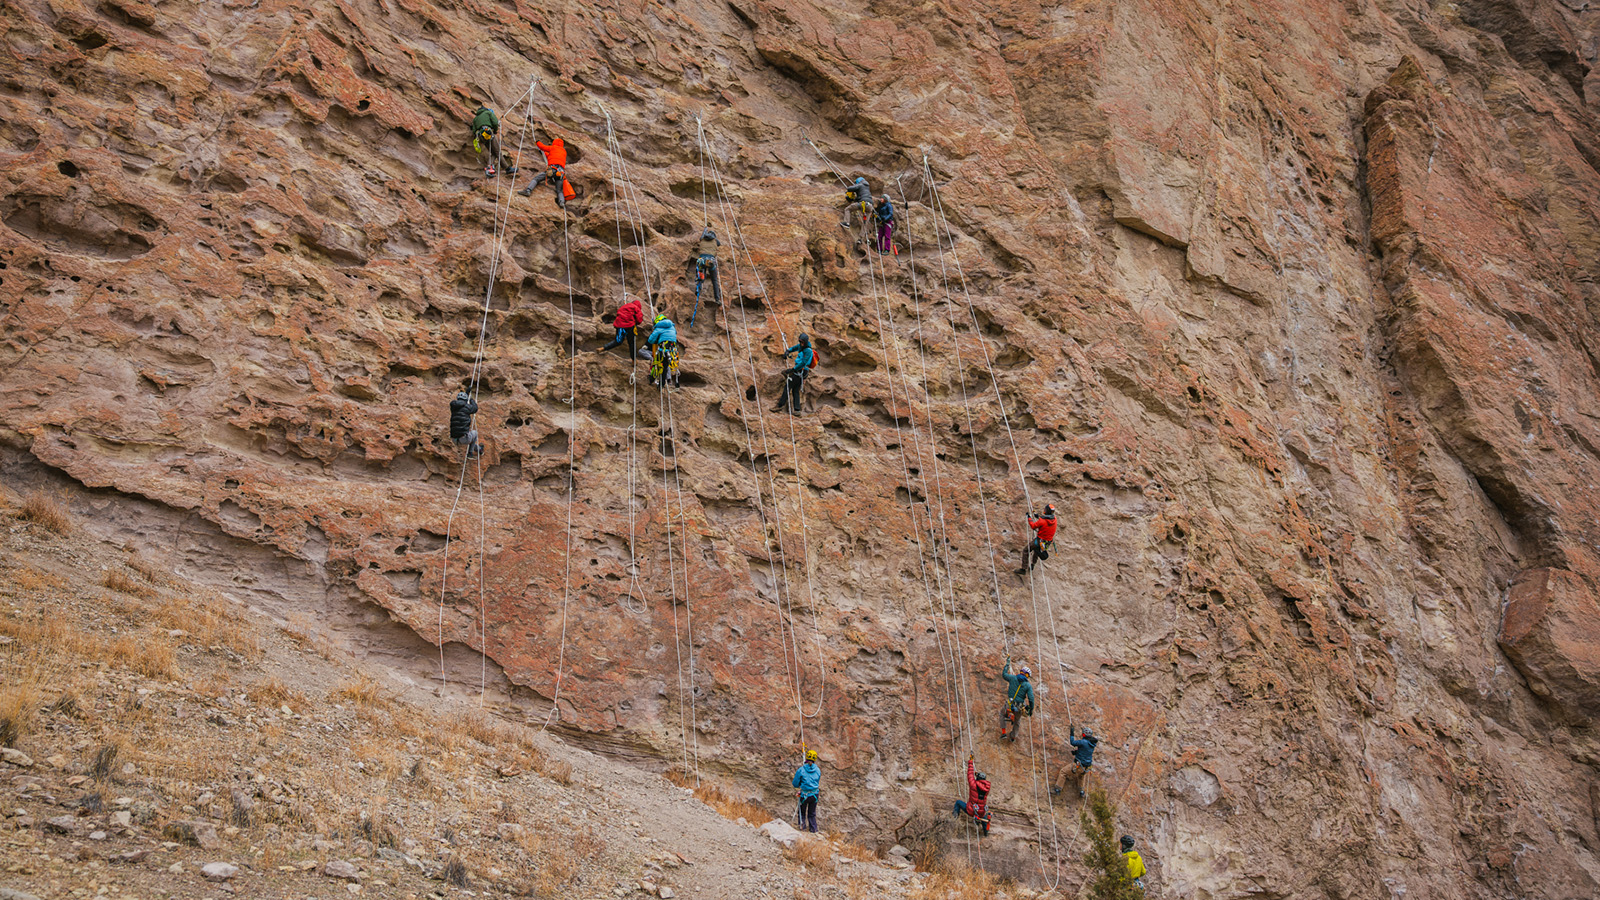 Volunteers re-bolting climbing routes at Smith ROck